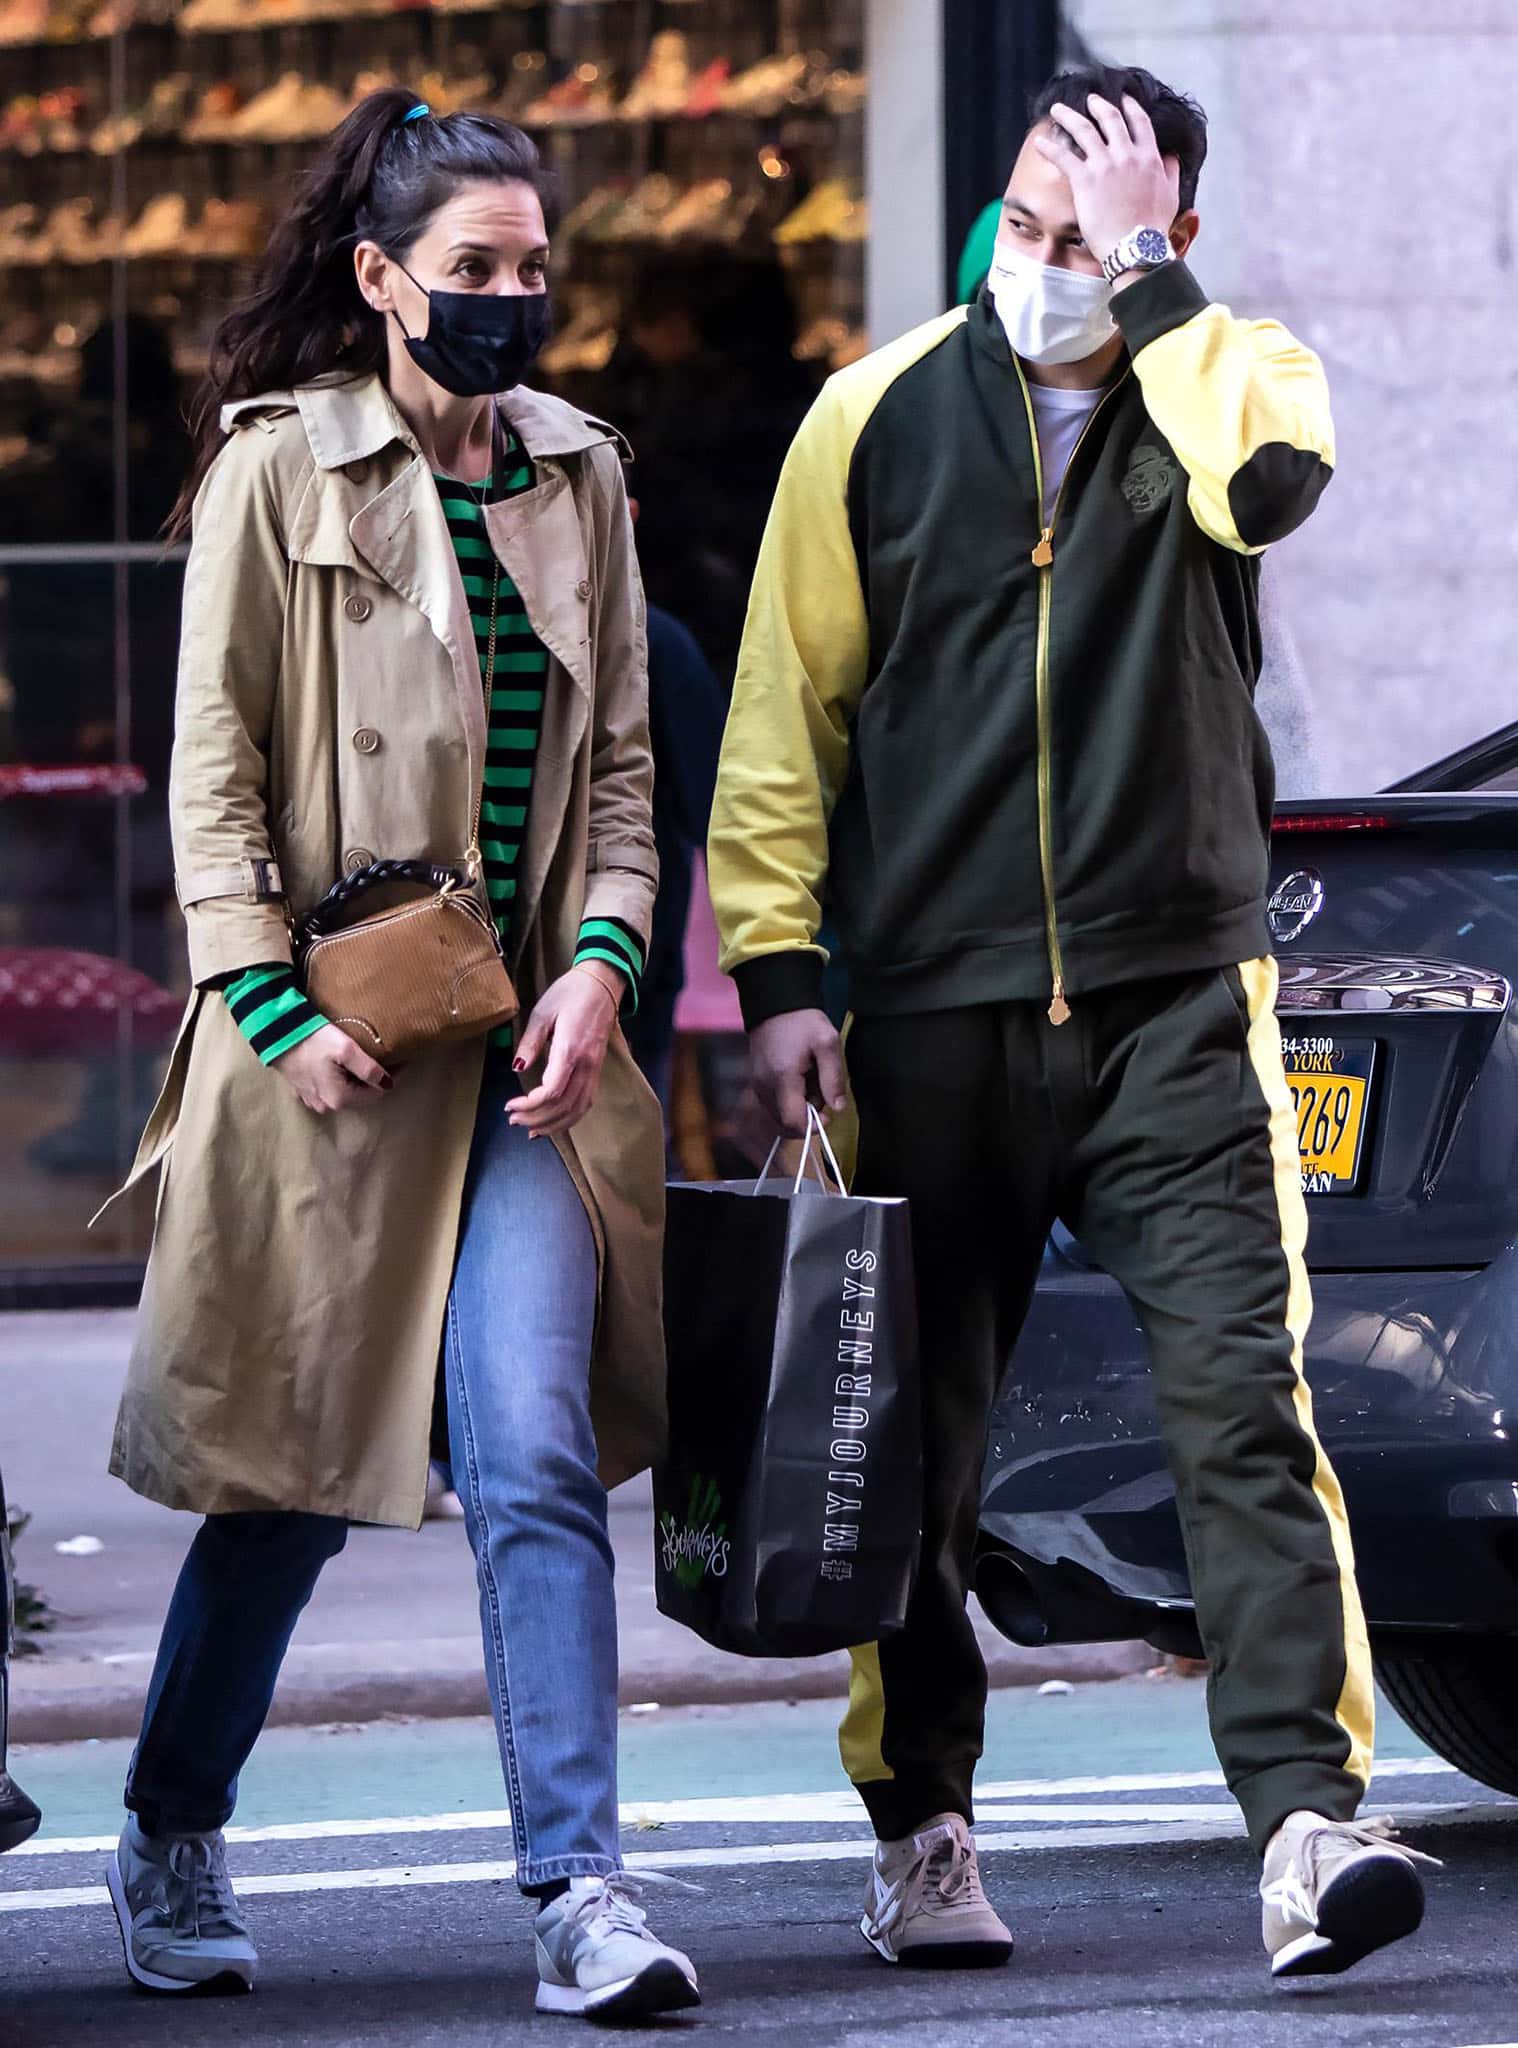 Katie Holmes and Emilio Vitolo Jr. out and about in New York City on March 9, 2021